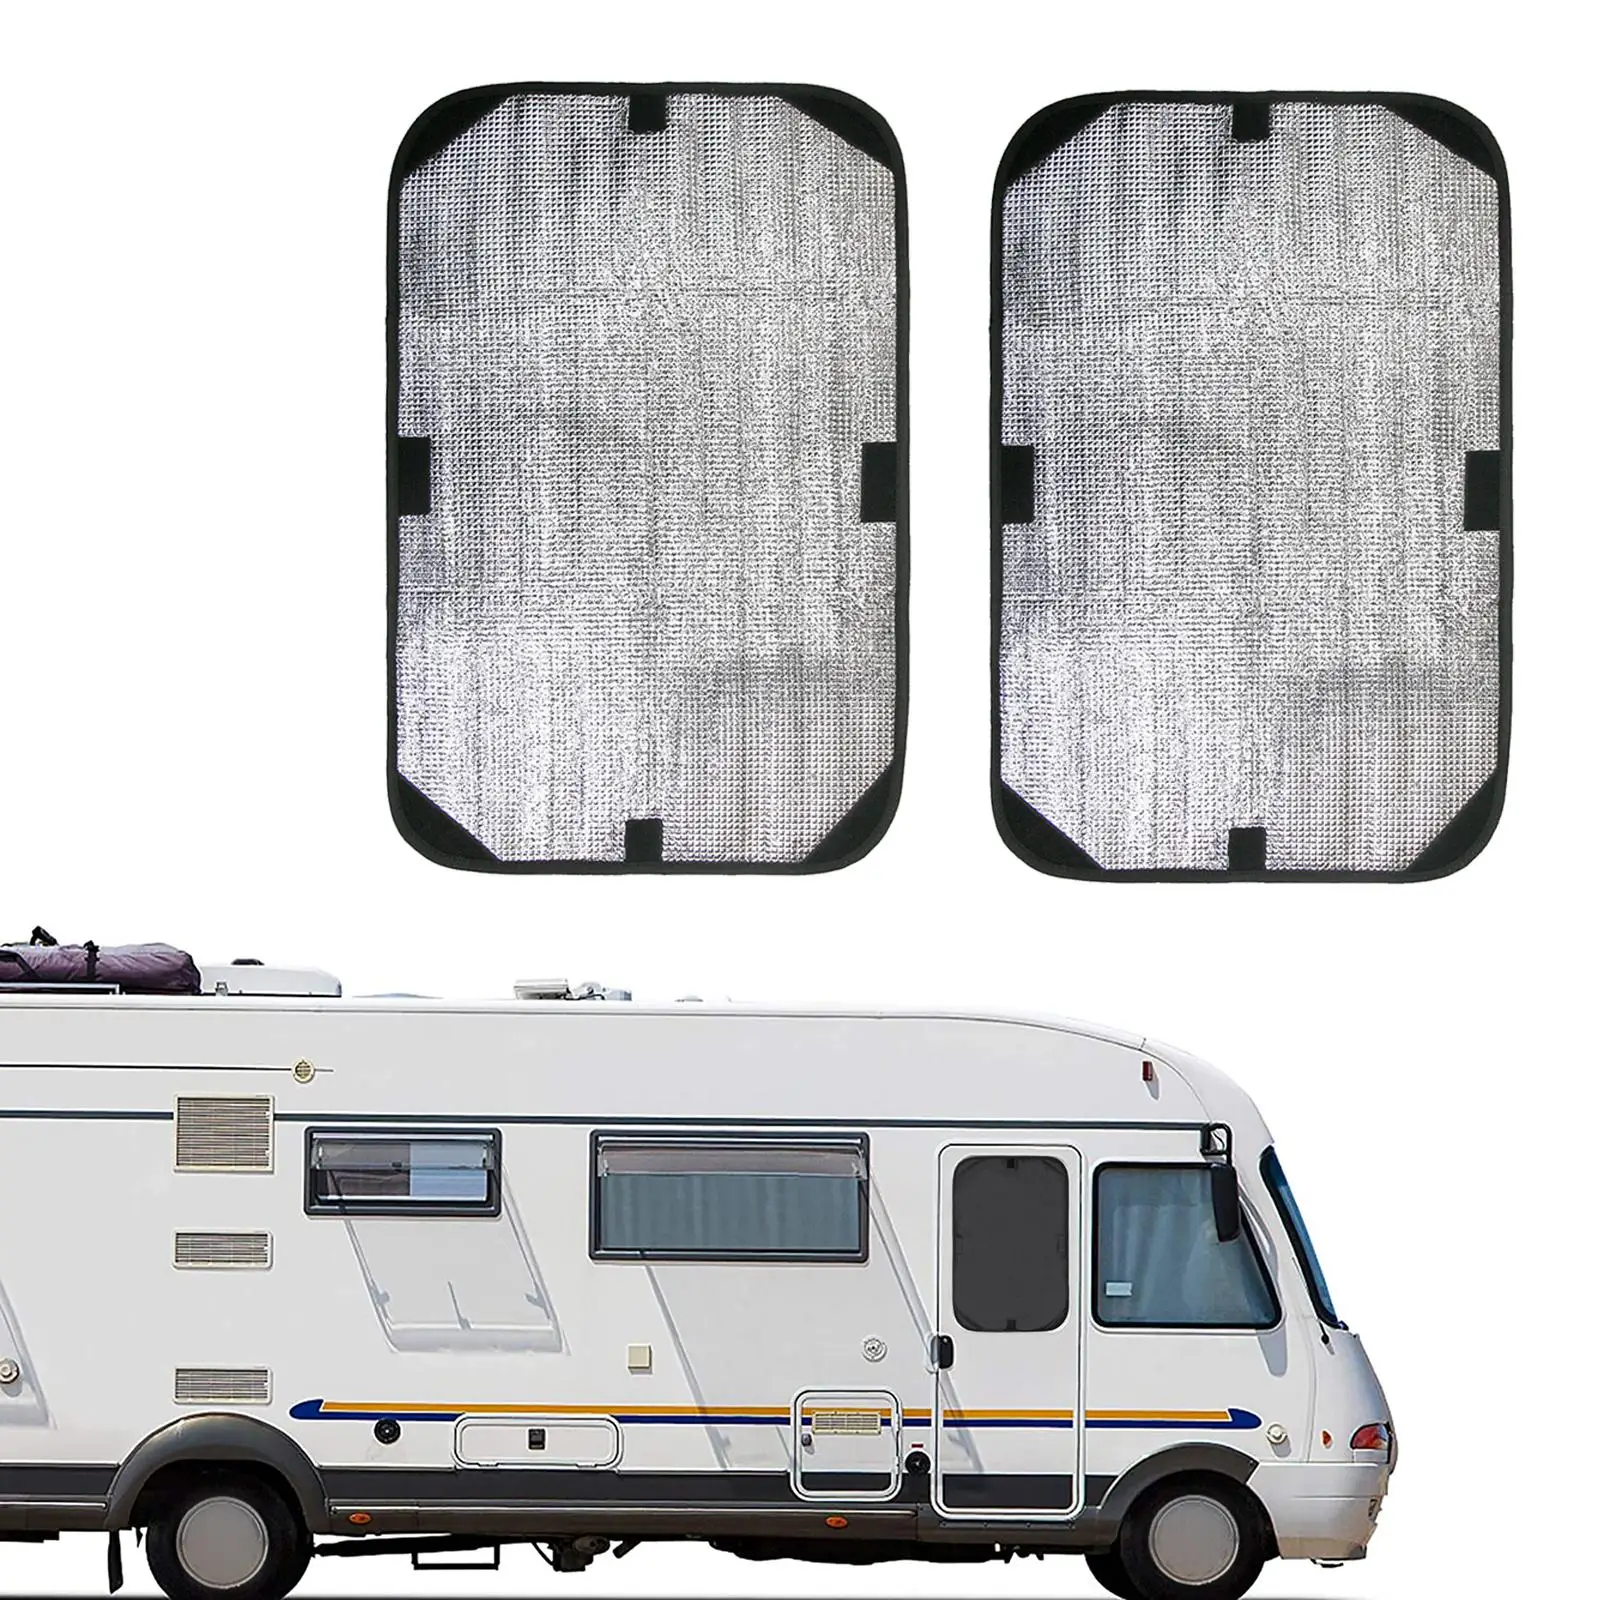 RV Door Window Shade Cover 15.94x24.41inch Sunshield Window Cover for Regulating Temperature